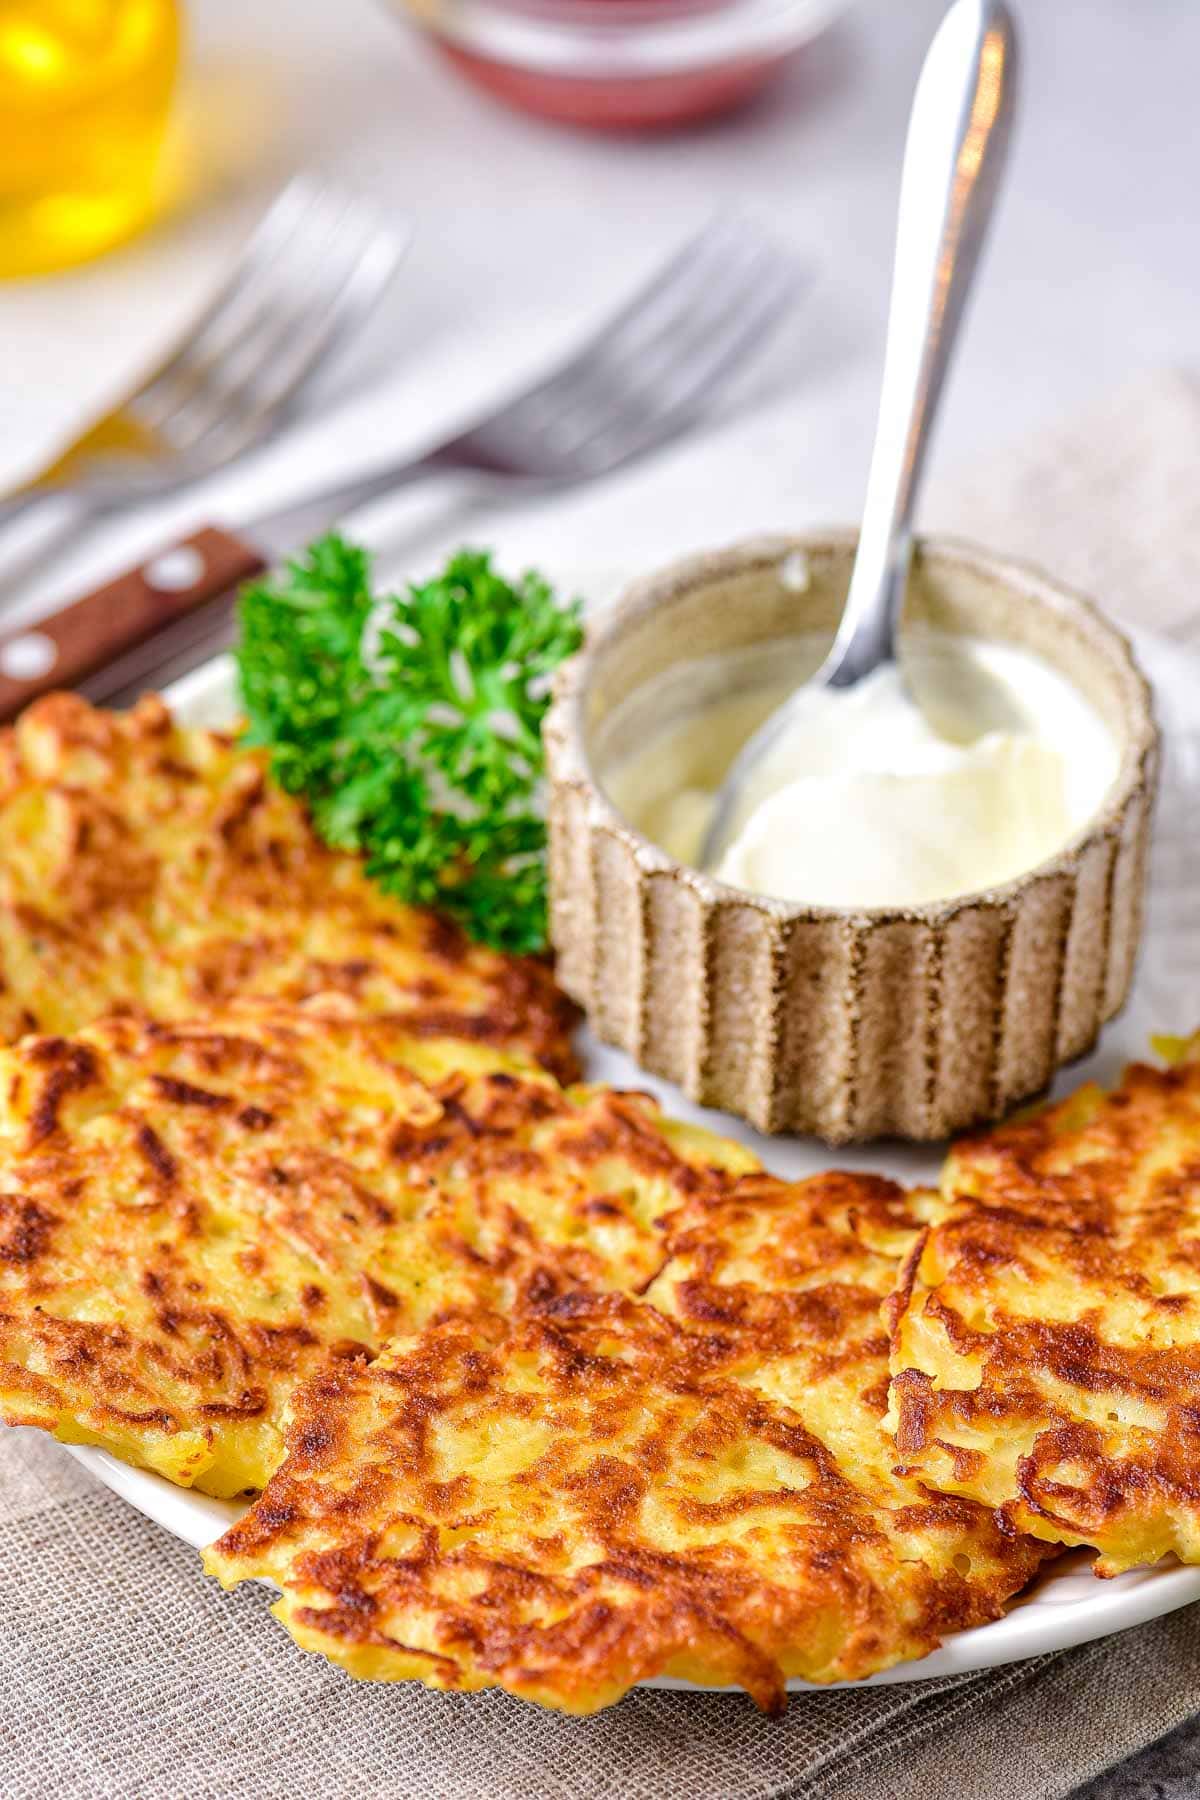 potato pancakes laying flat on plate with dish of sour cream and spoon behind beside parsley.